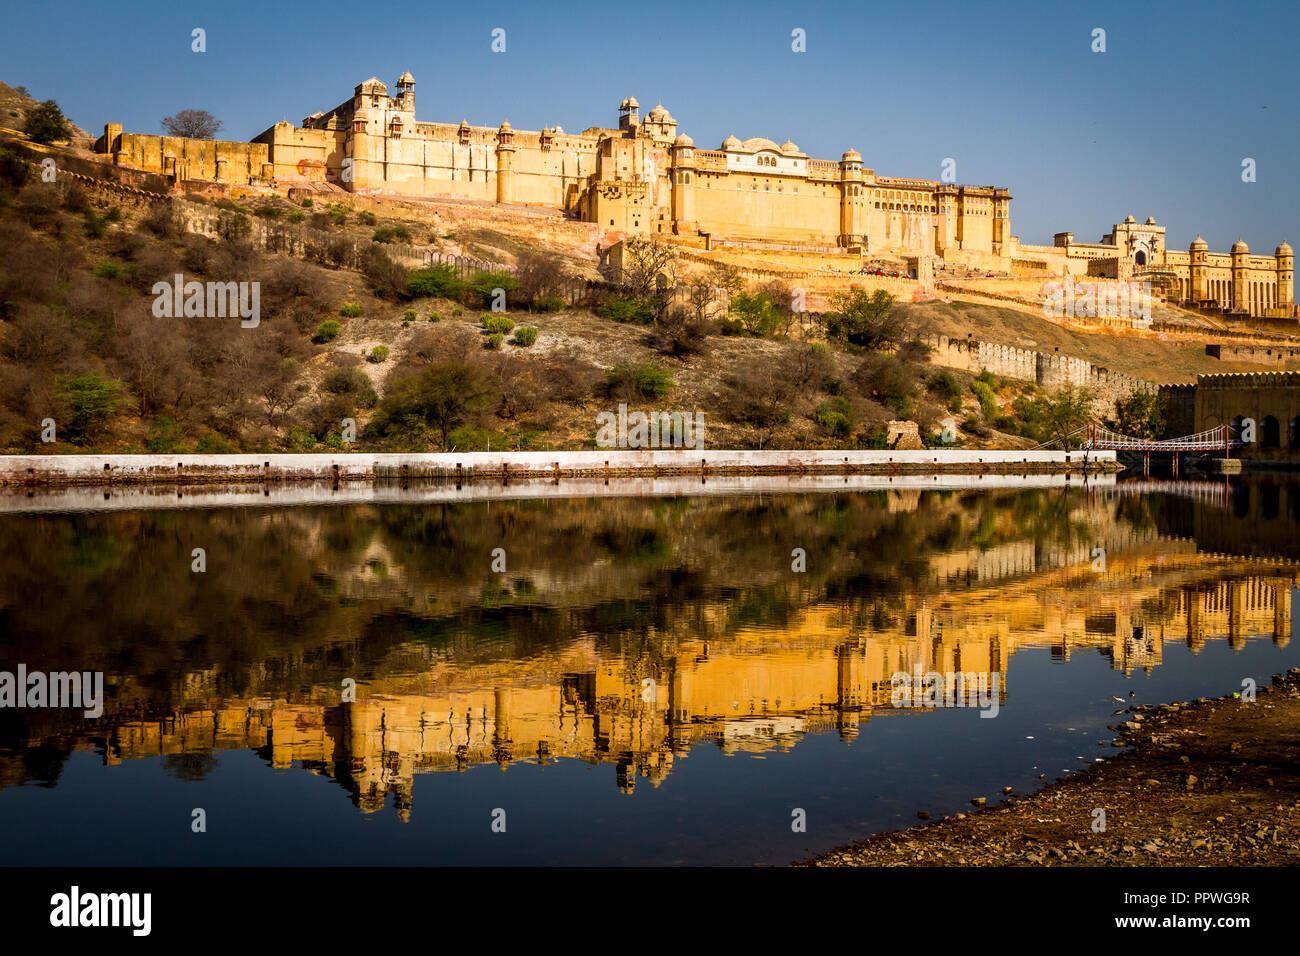 Looking towards Nahargarh Fort, Jaipur with it's reflection in foreground Stock Photo